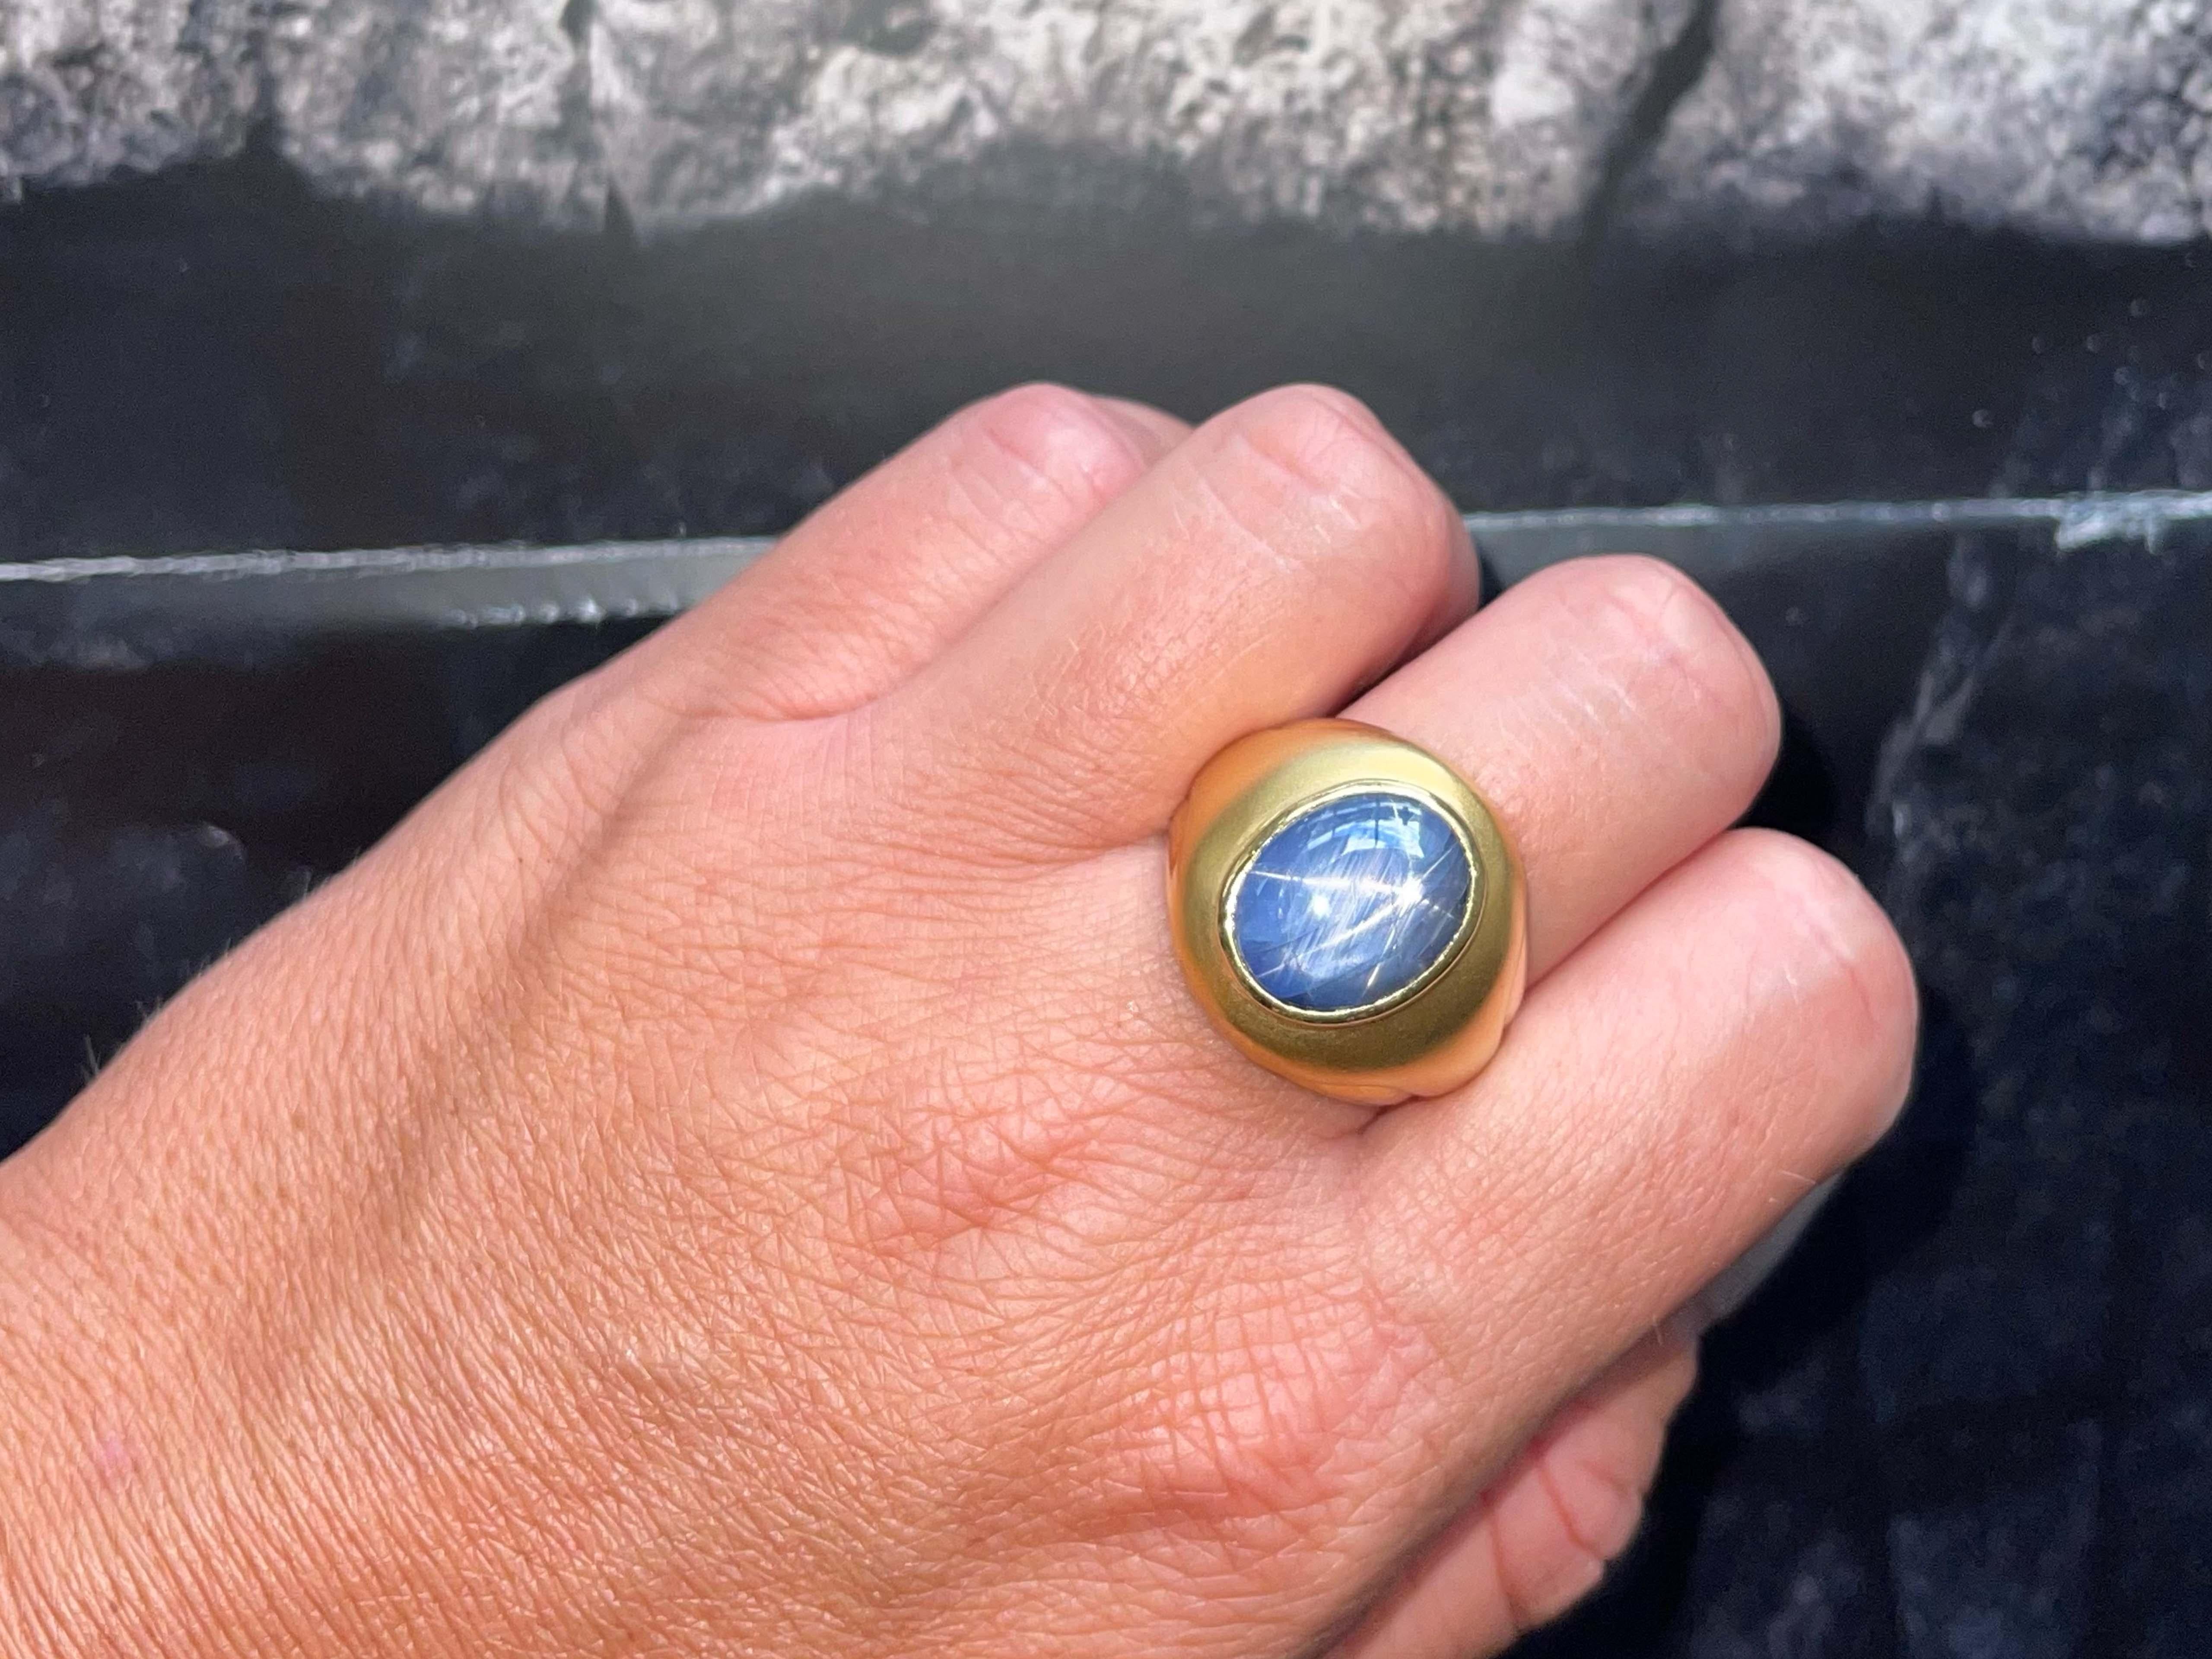 Ring Specifications:

Metal: 18k Yellow Gold

Total Weight: 20.8 Grams

Star Sapphire Measurements: 14.9 mm x 12.18 mm x 6.30 mm 

Star Sapphire Carat Weight: ~8.48 carats

Ring Size: 10 (resizable)

Stamped:  